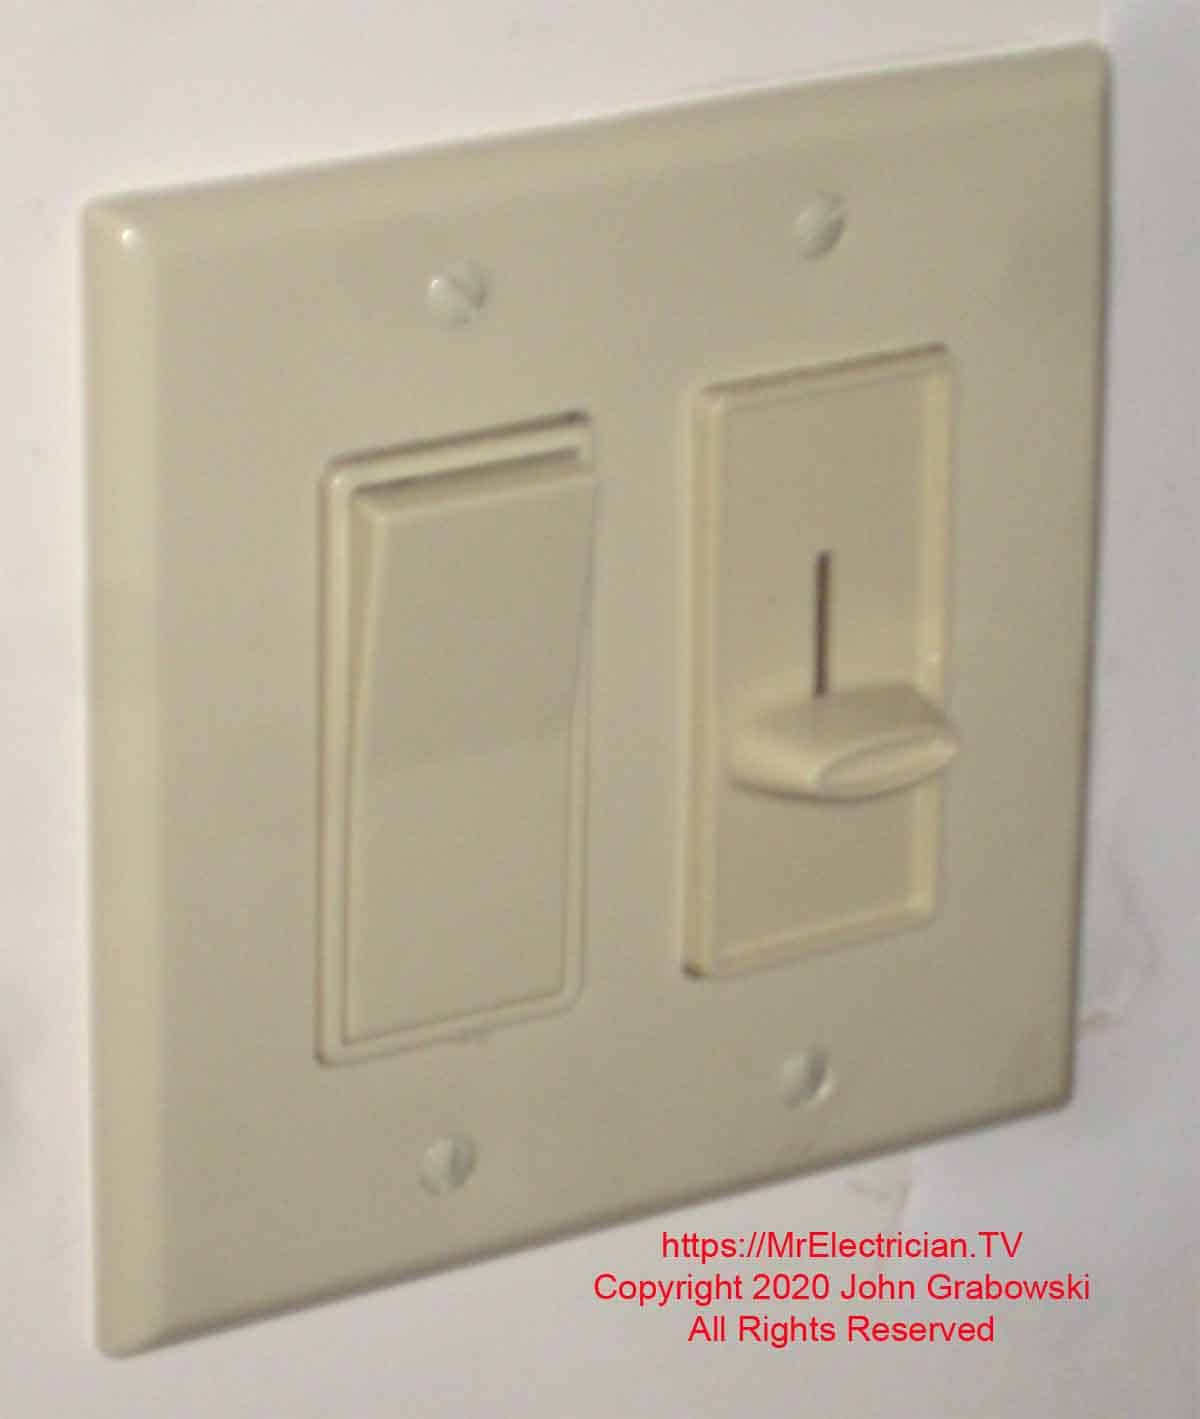 The finished wall switch and dimmer in a two gang switch box.